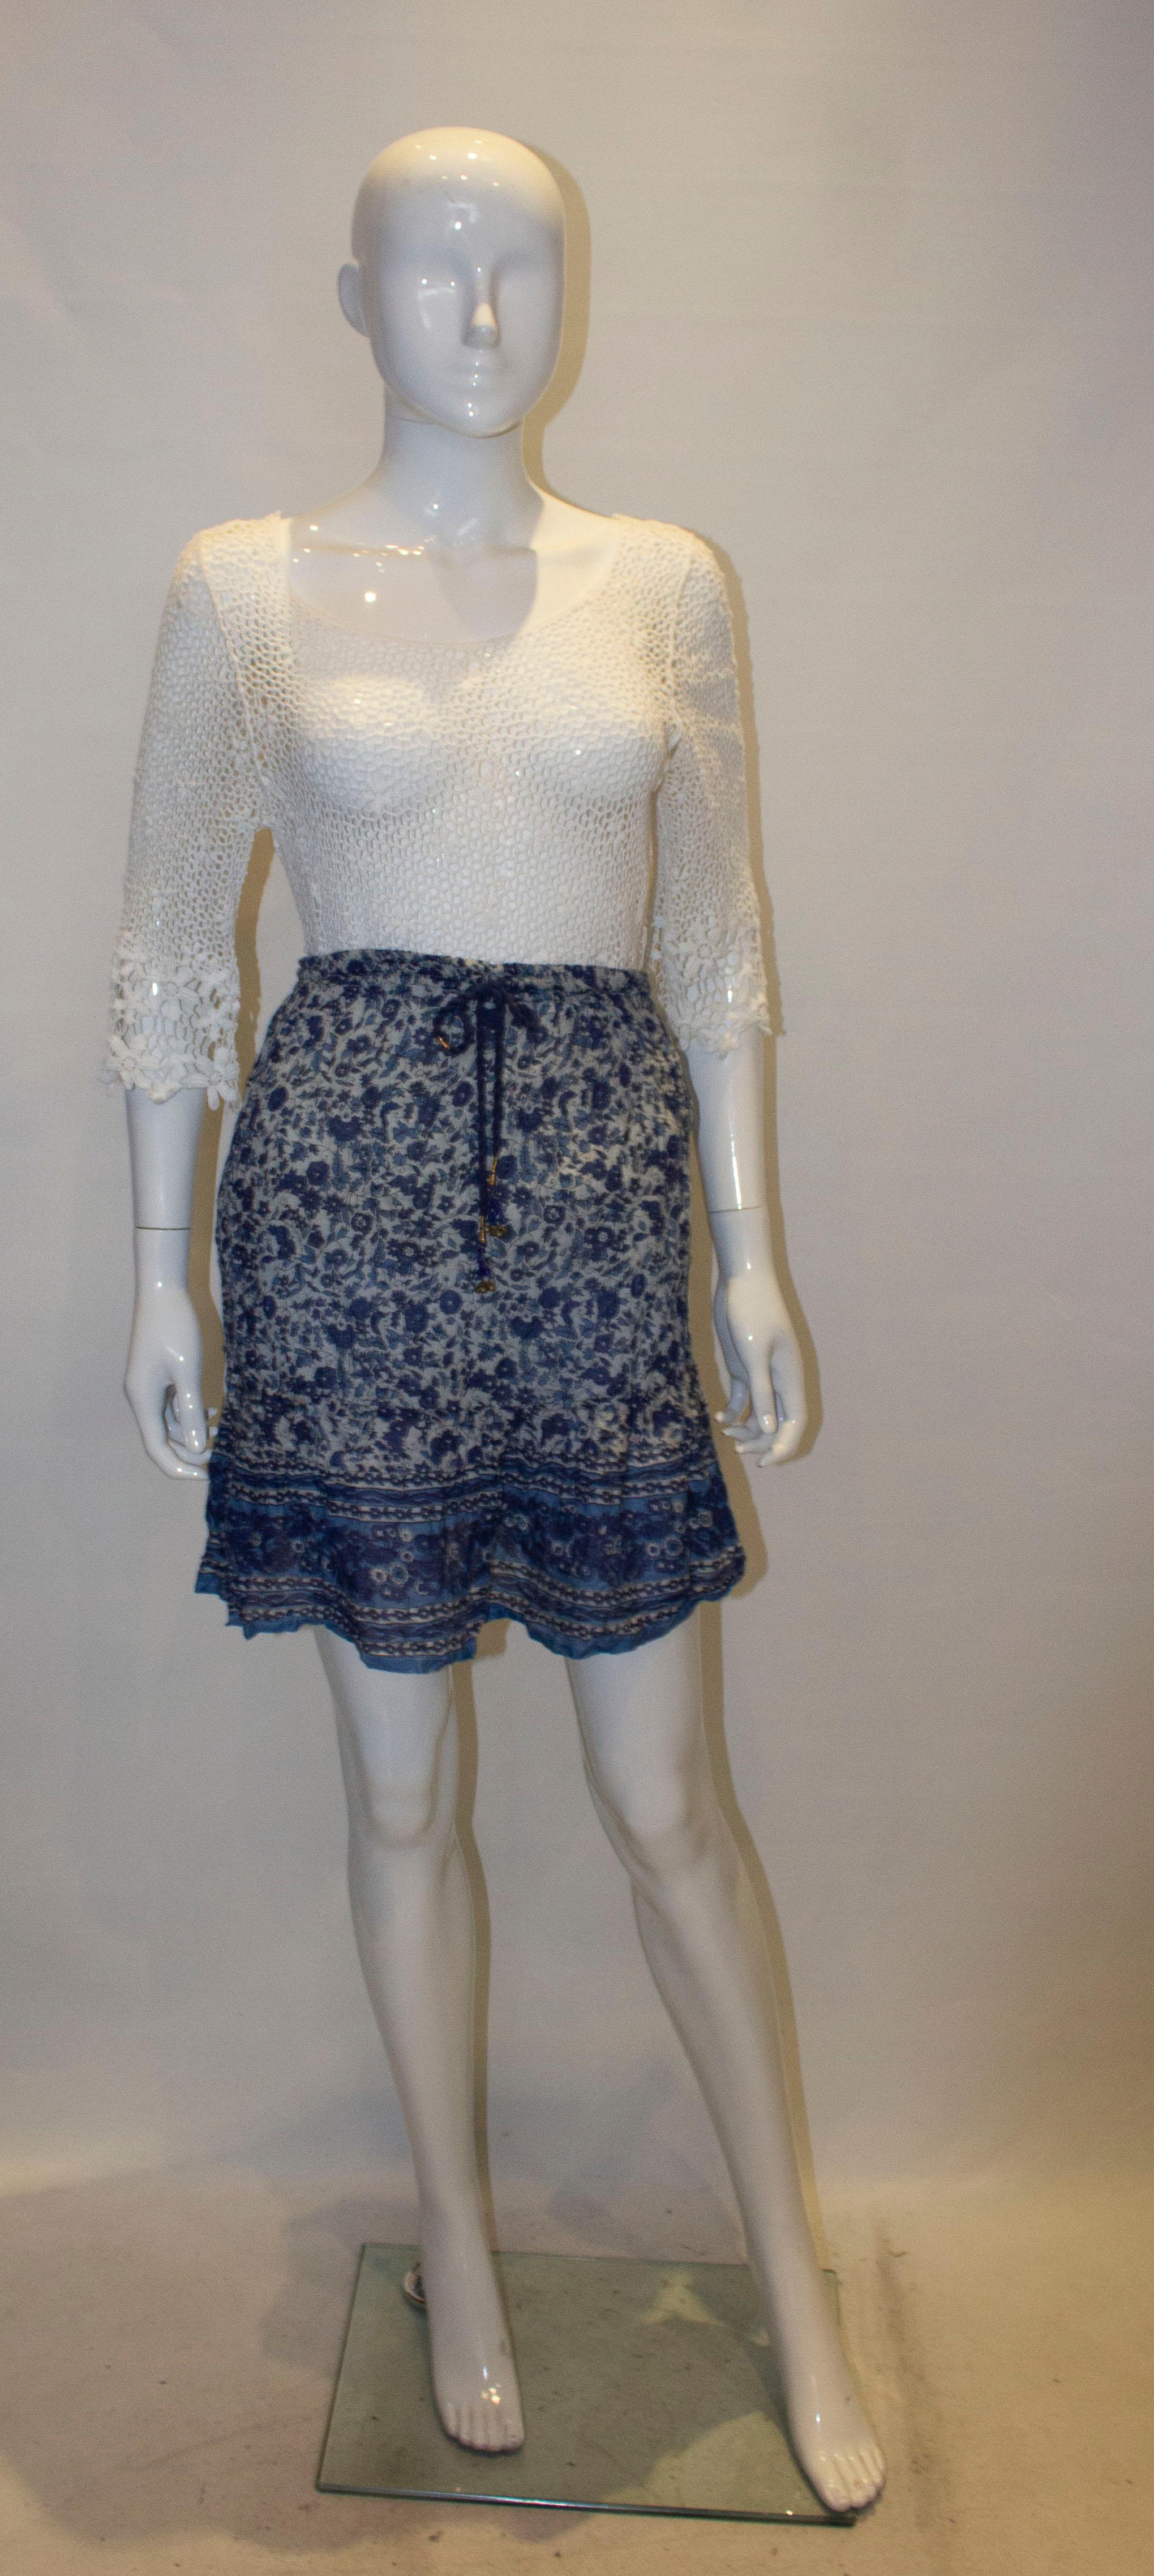 A pretty vintage Indian cotton skirt in shades of blue. The skirt is fully  lined , has a frill at the hem and a drawstring waist. Measurements , waist 25'' - 28'', length 20''.